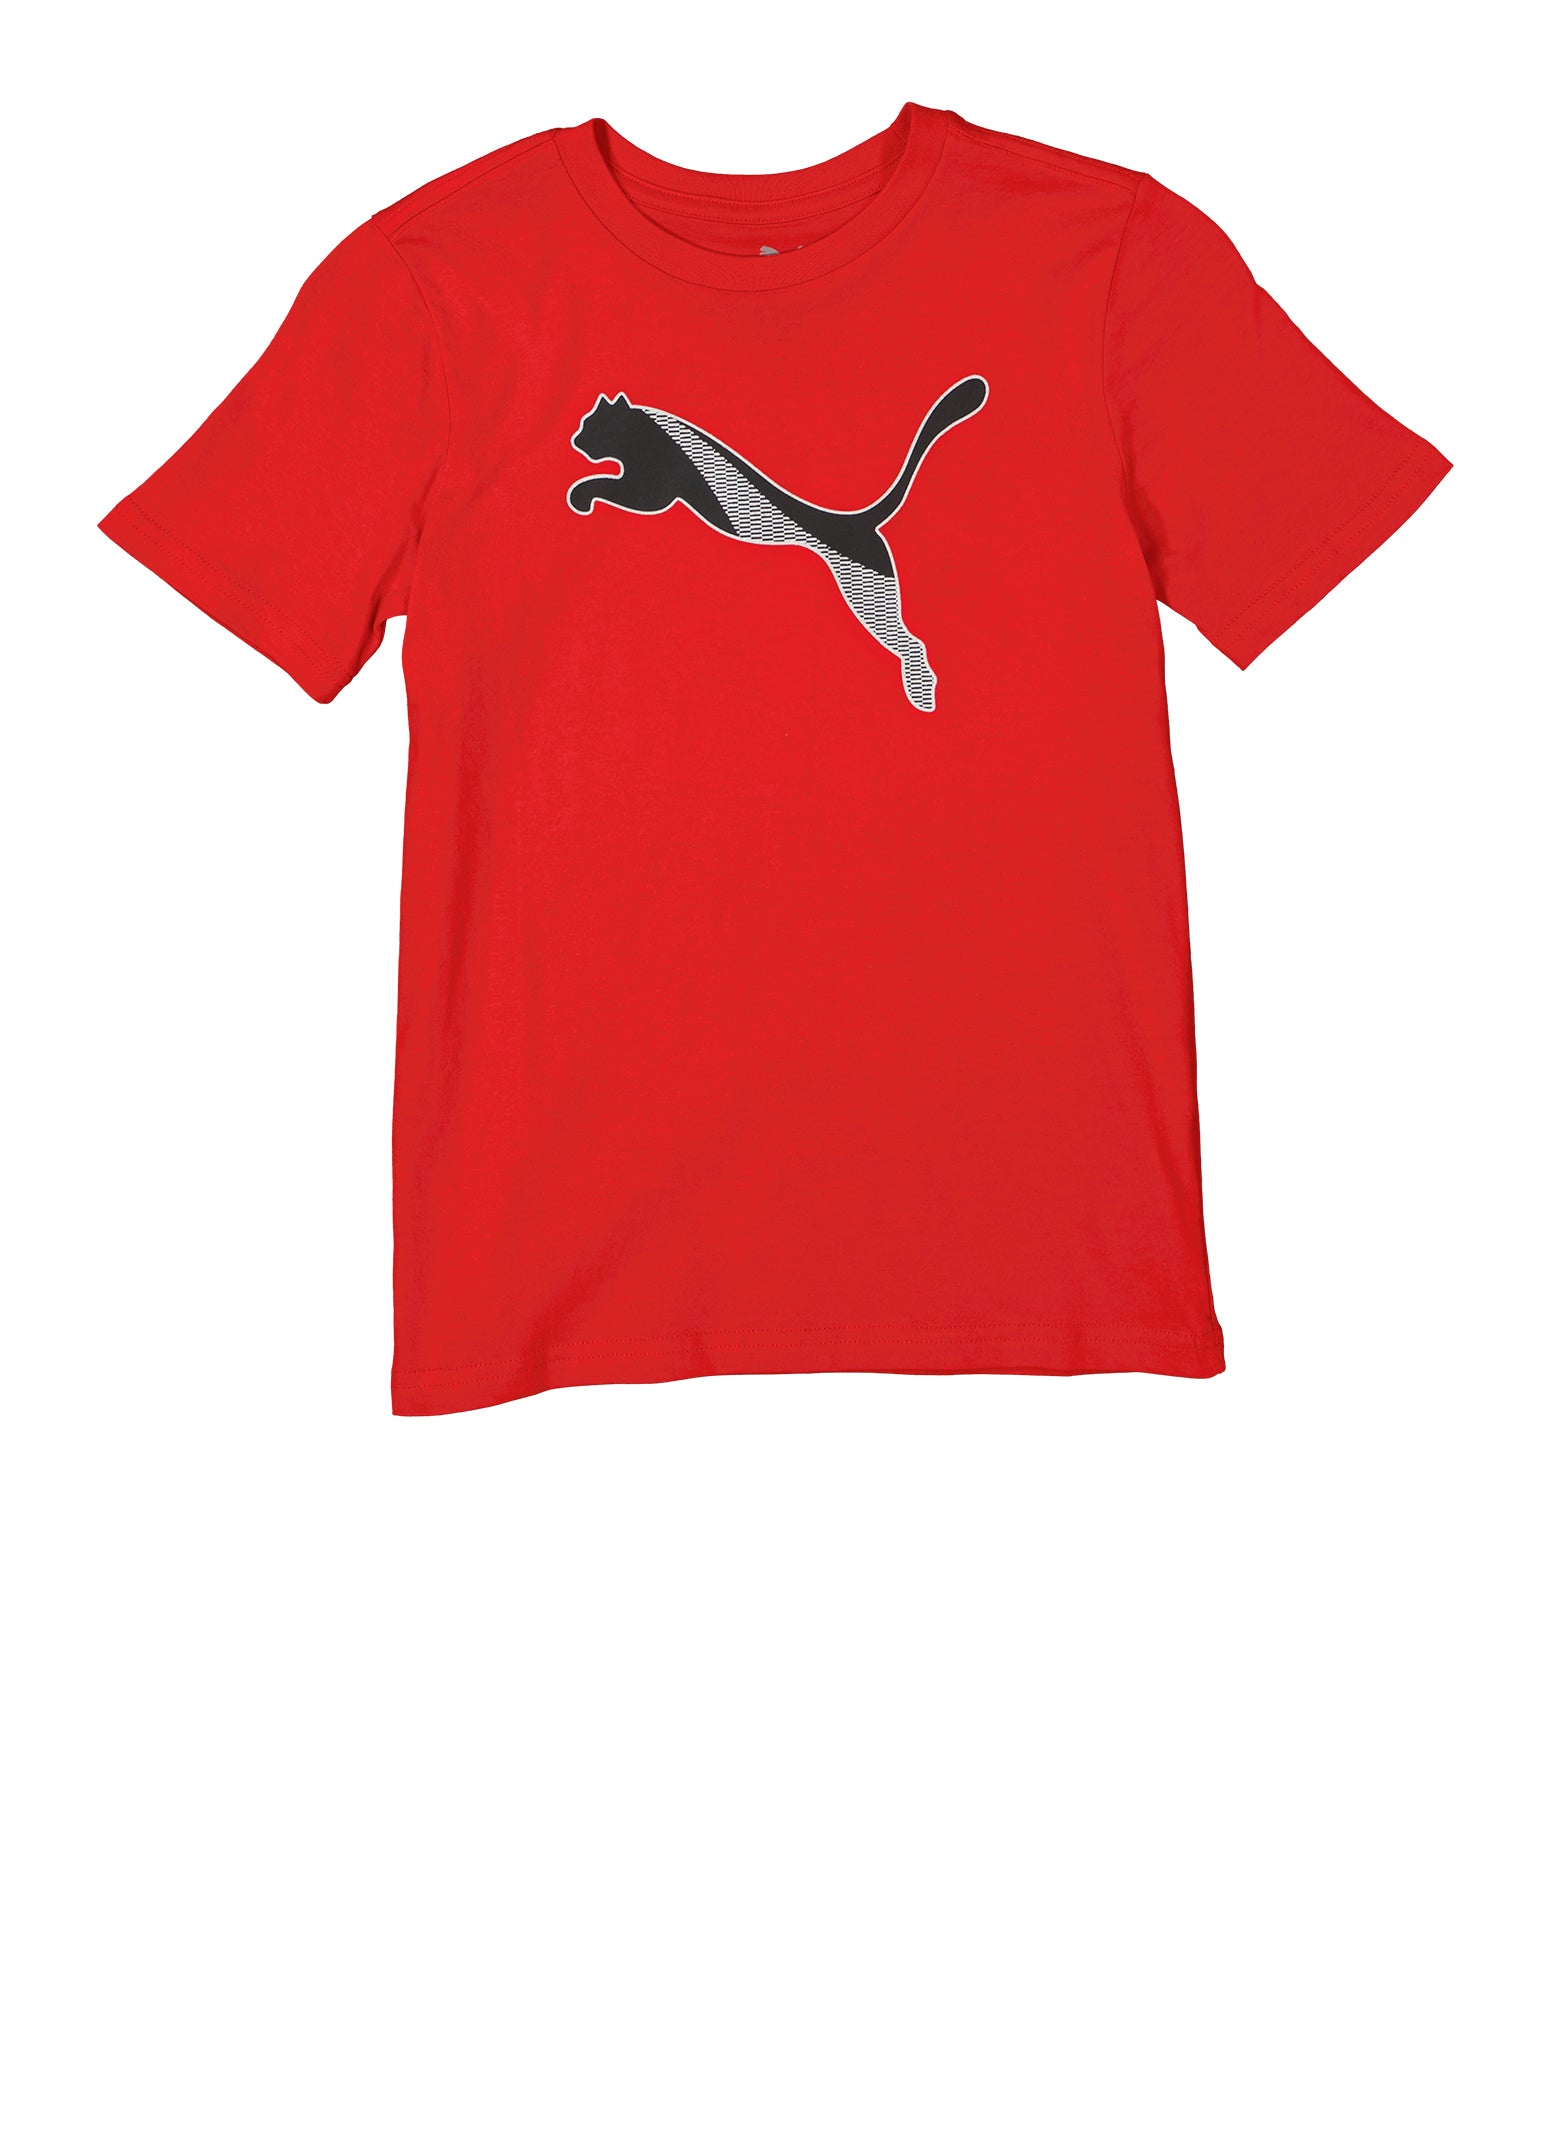 Boys Two Logo Tee - Red